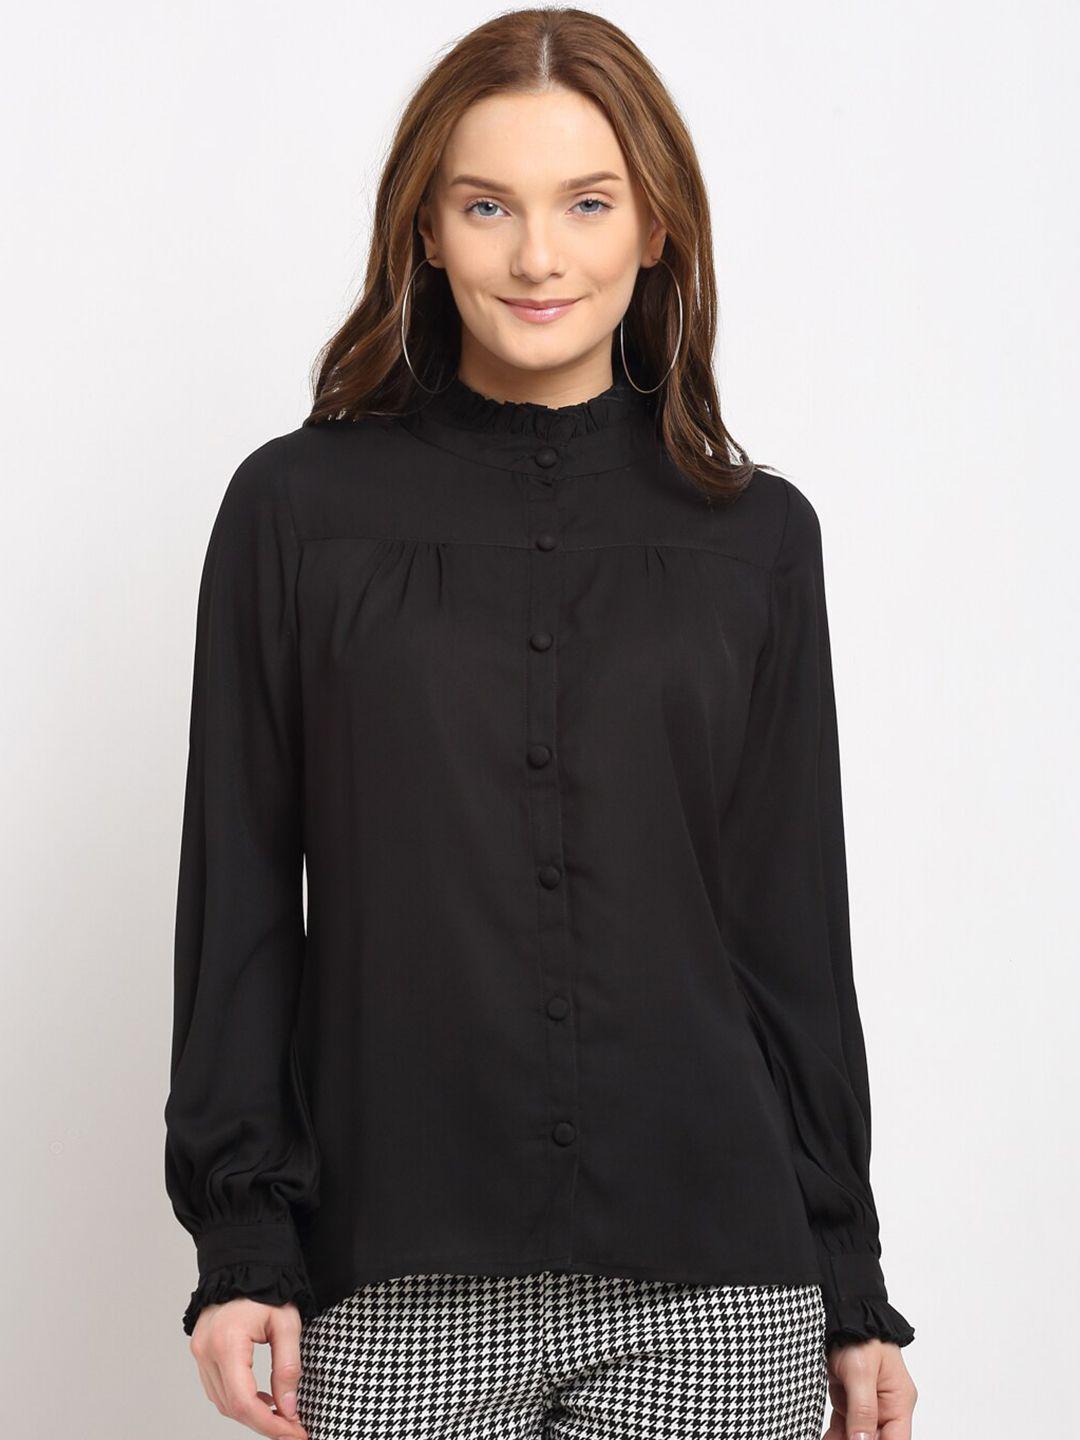 la-zoire-black-mandarin-collar-shirt-style-top-with-frilled-details